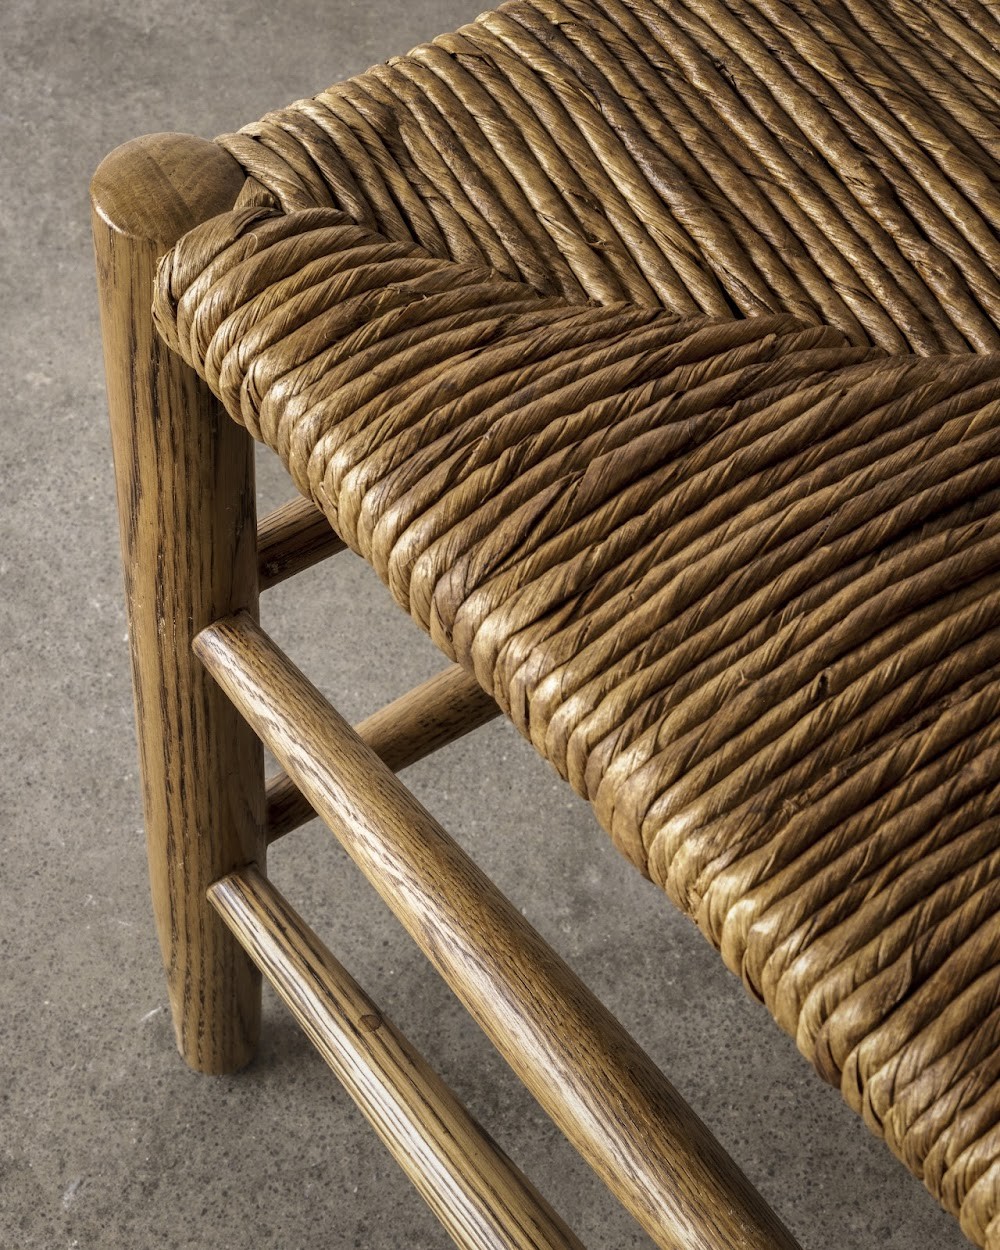 a close up of a wooden bench with a woven seat